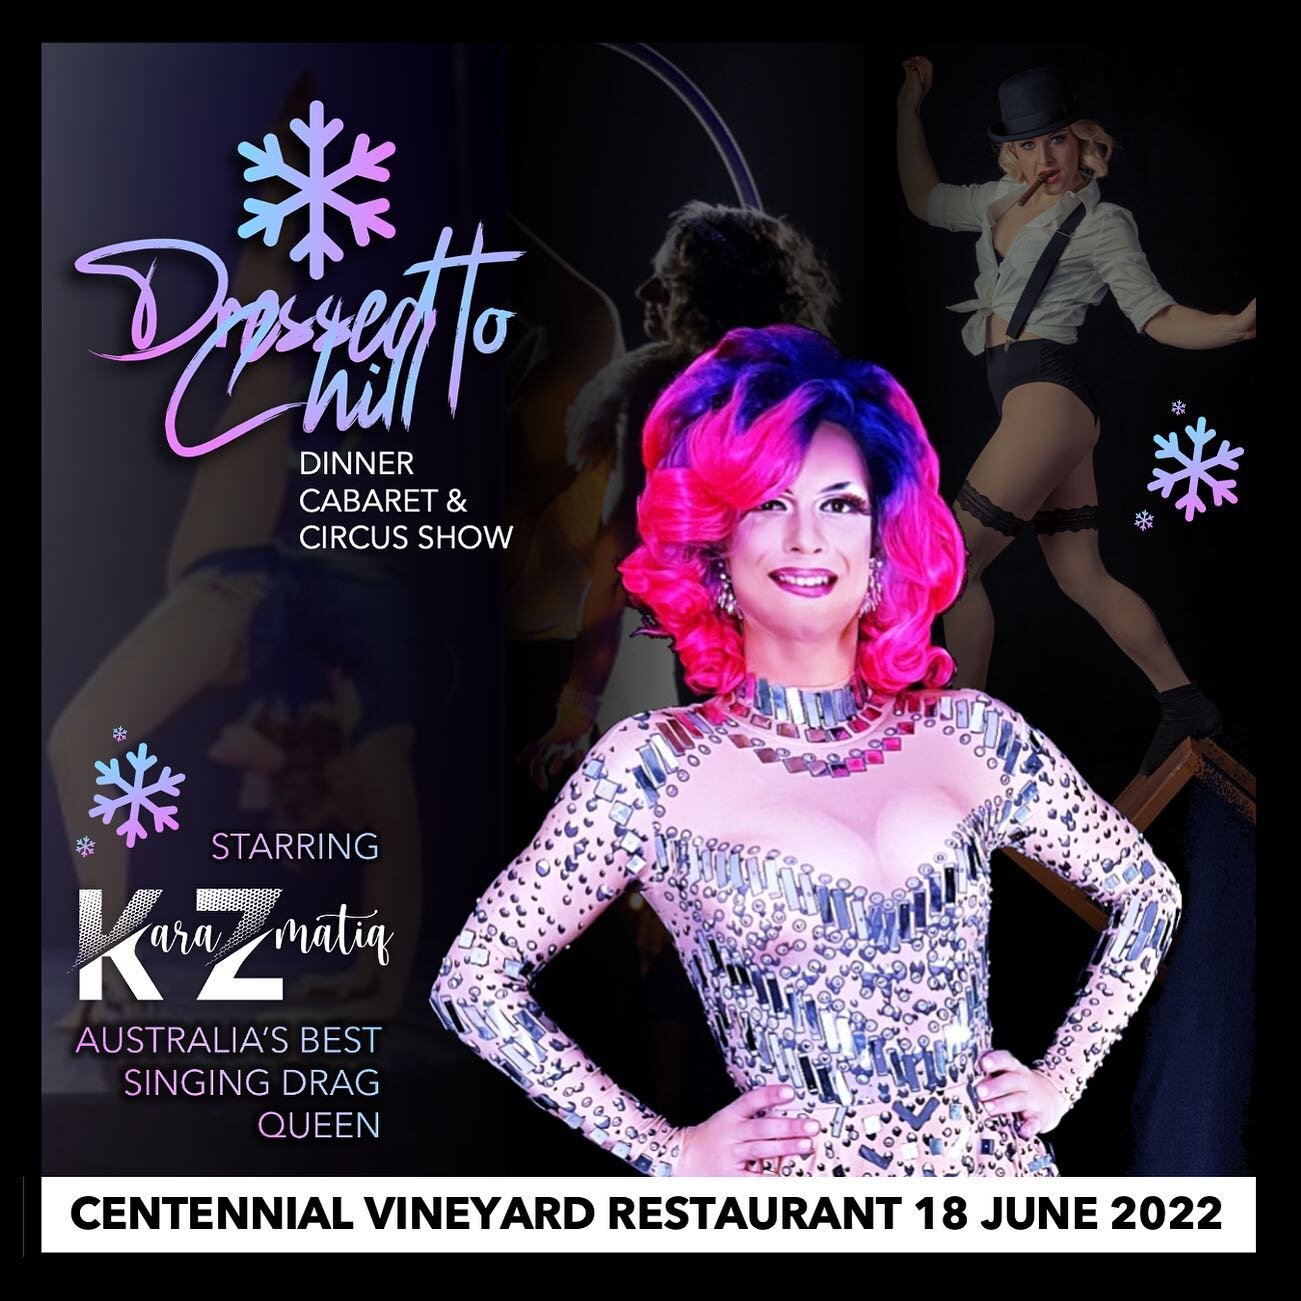 The word is out!! 💃🏼
.
This June we&rsquo;ll be warming up the Southern Highlands as we join forces with the amazingly talented singing Drag Queen @karazmatiq 🤩 in this unforgettable Dinner Cabaret &amp; Circus Show&hellip; &lsquo;Dressed to Chill